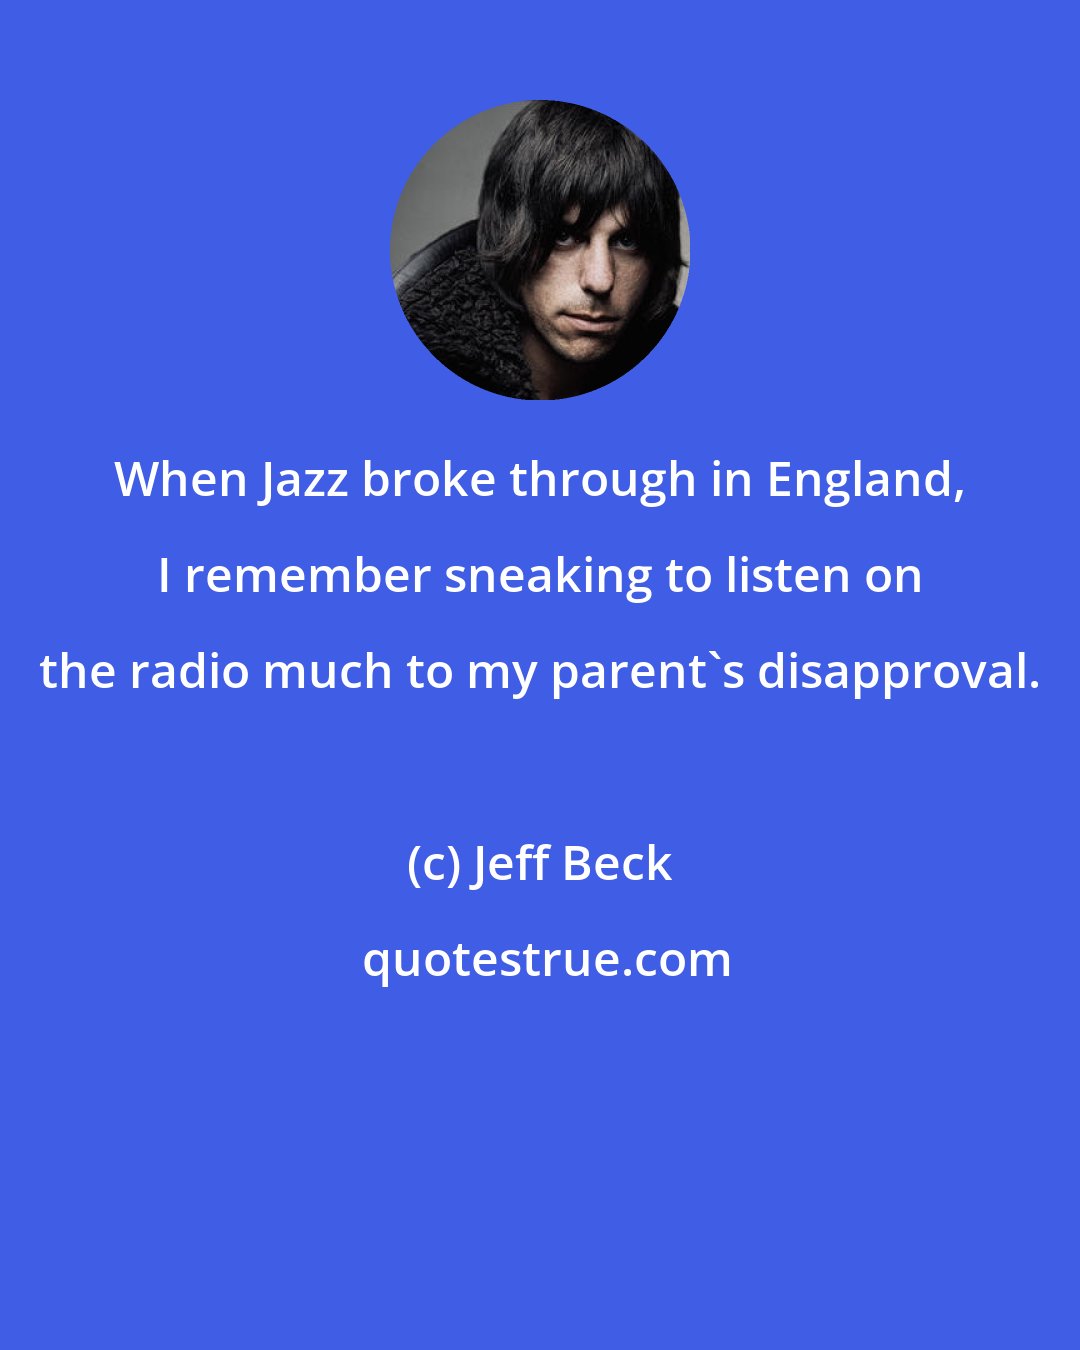 Jeff Beck: When Jazz broke through in England, I remember sneaking to listen on the radio much to my parent's disapproval.